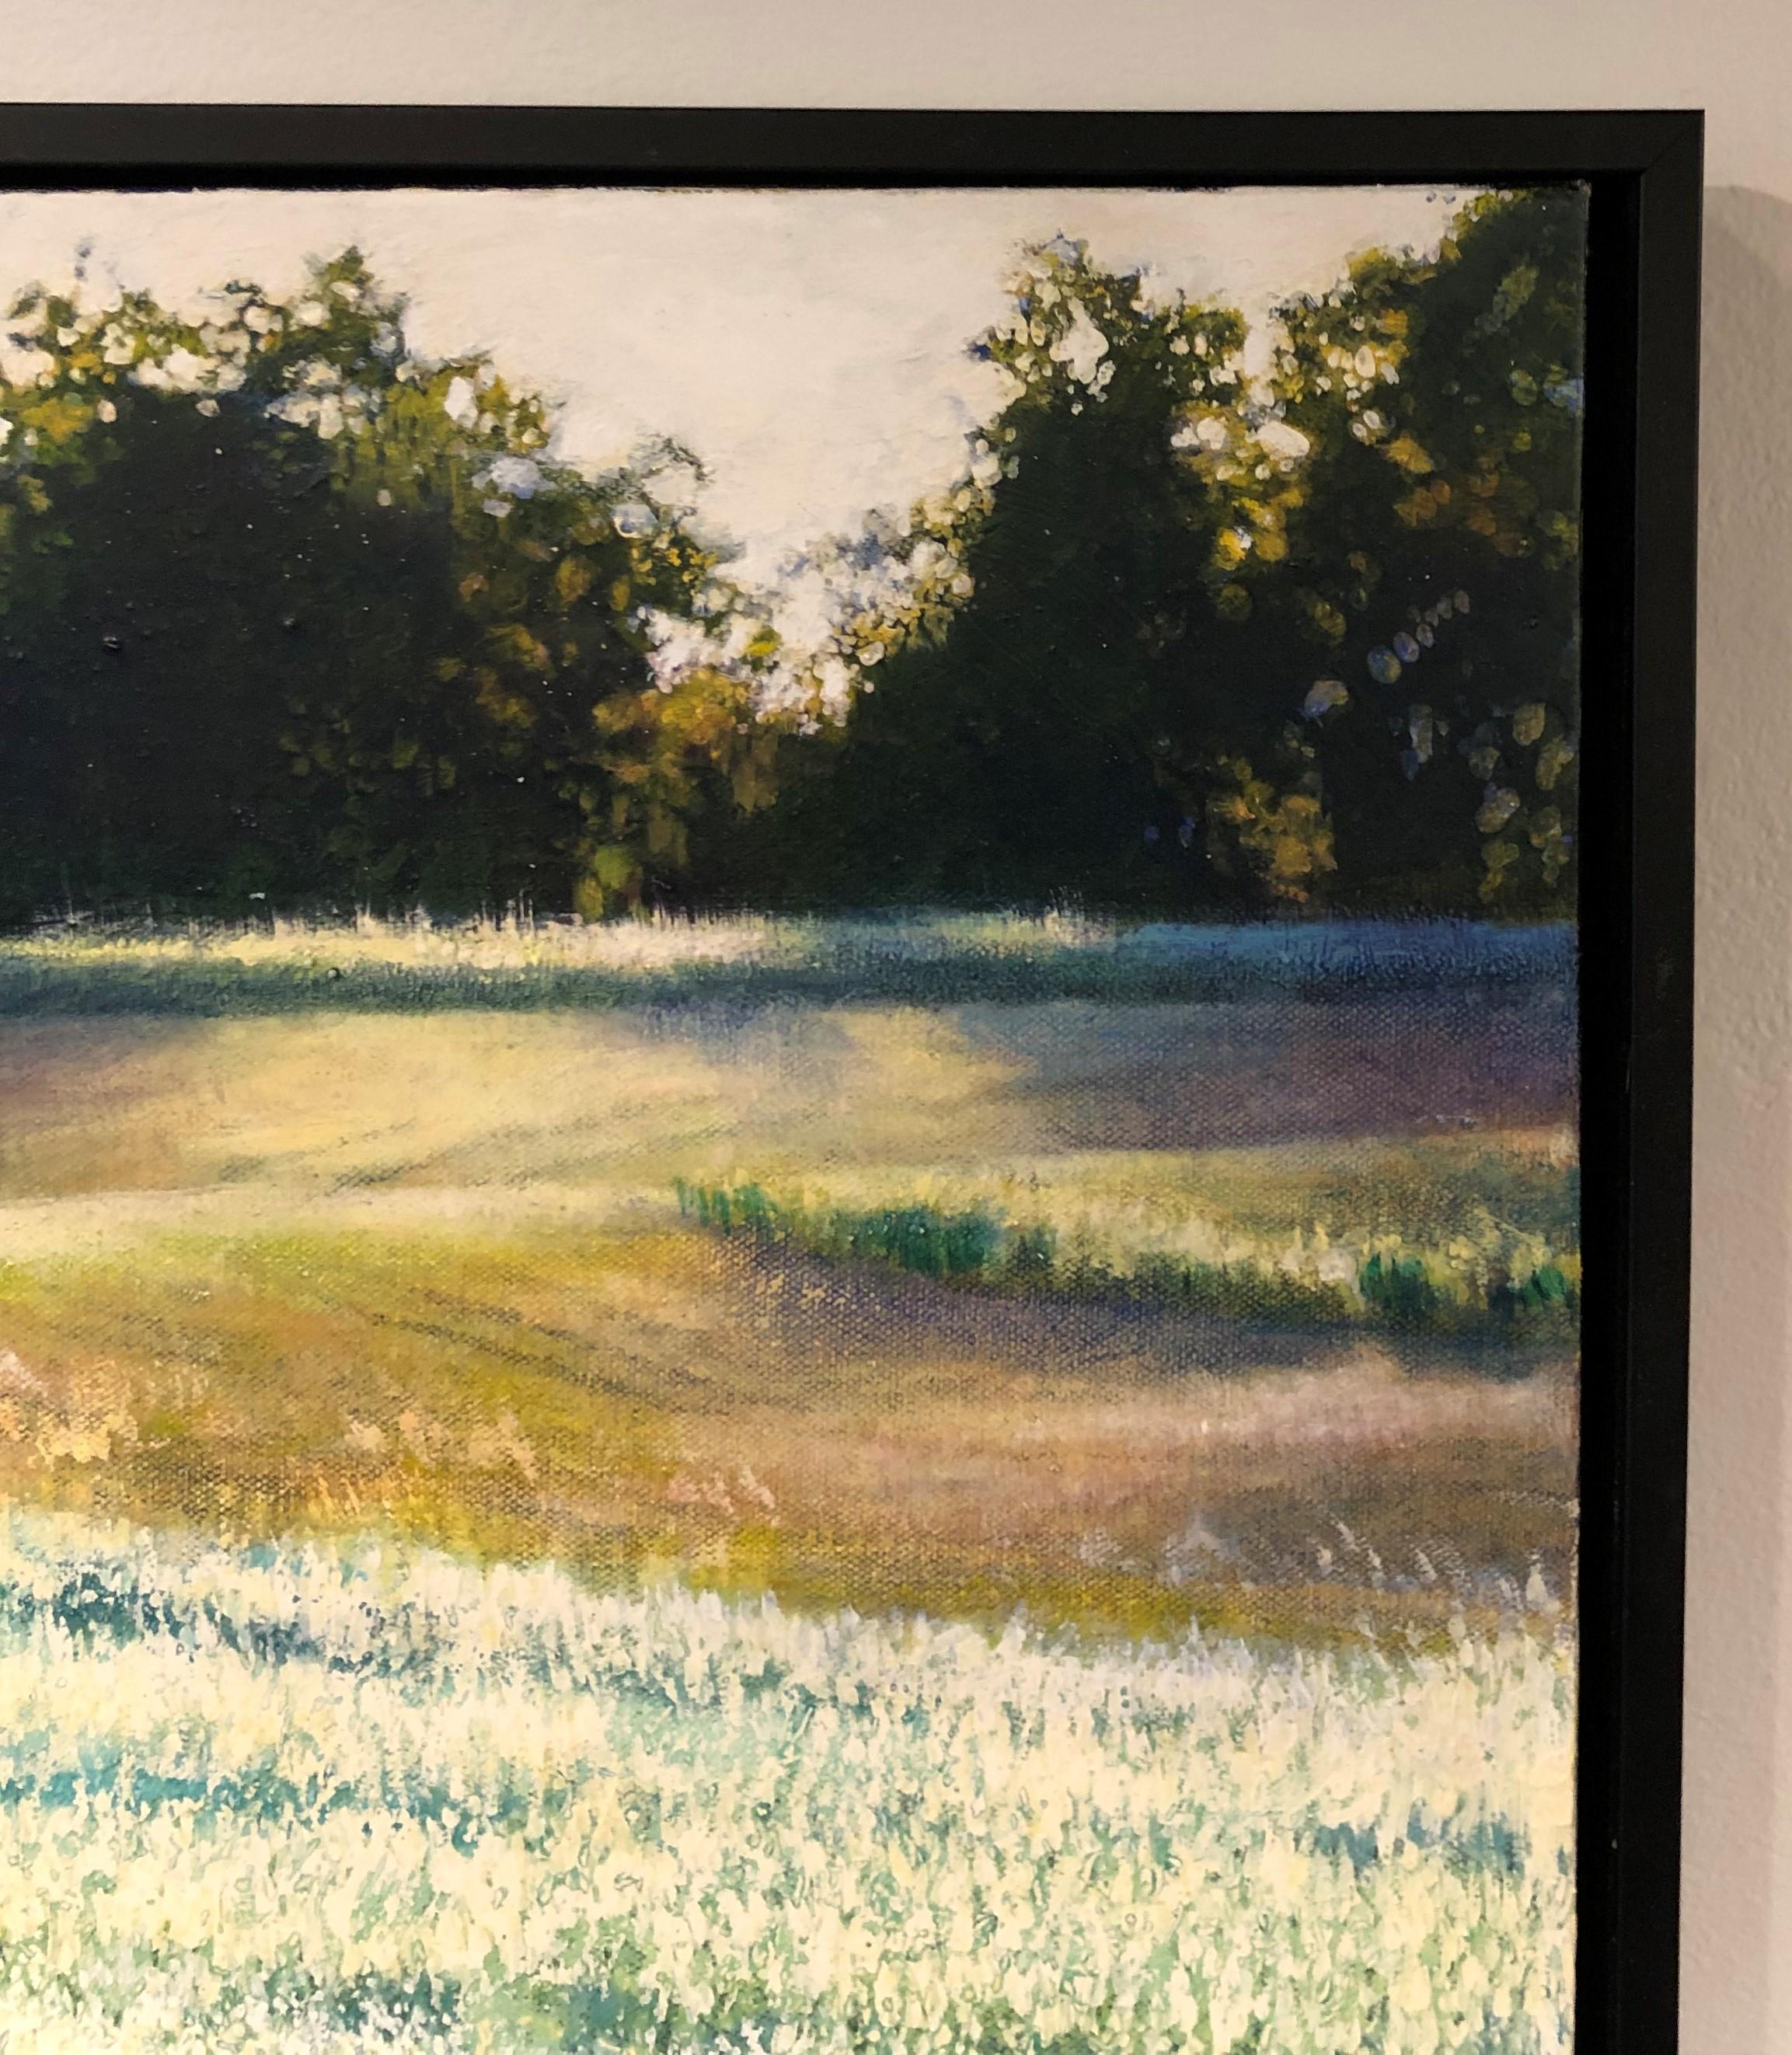 Barley Field - In Full Bloom on Rolling Hills, Oil on Canvas - Contemporary Painting by Deborah Ebbers